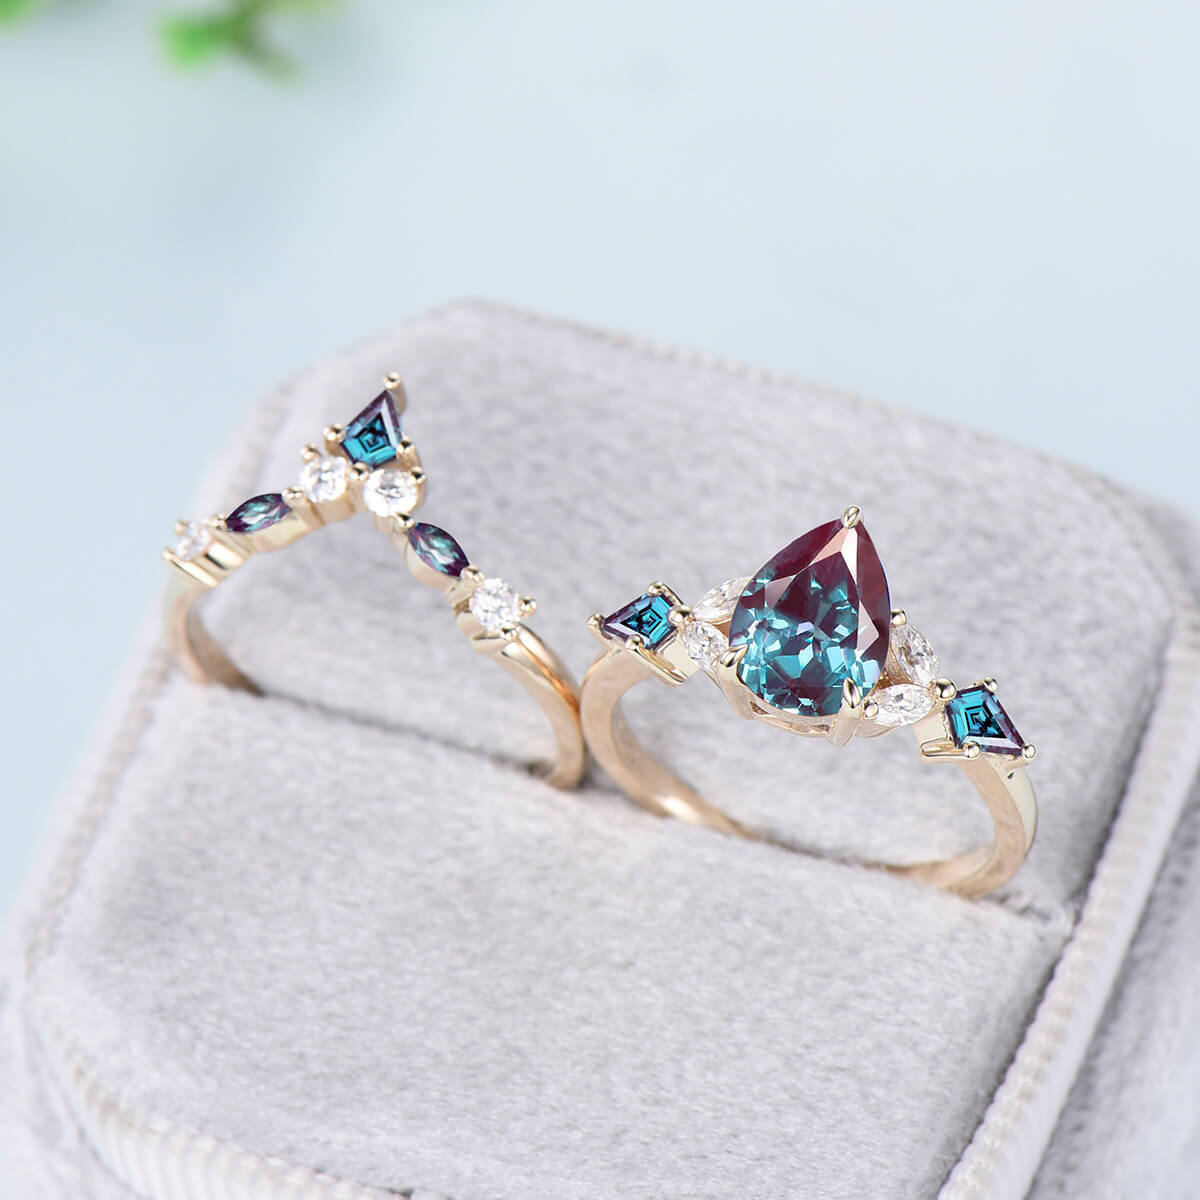 2pcs Vintage Pear shaped alexandrite engagement ring set 14 yellow gold cluster kite marquise alexandrite wedding ring set for women - PENFINE